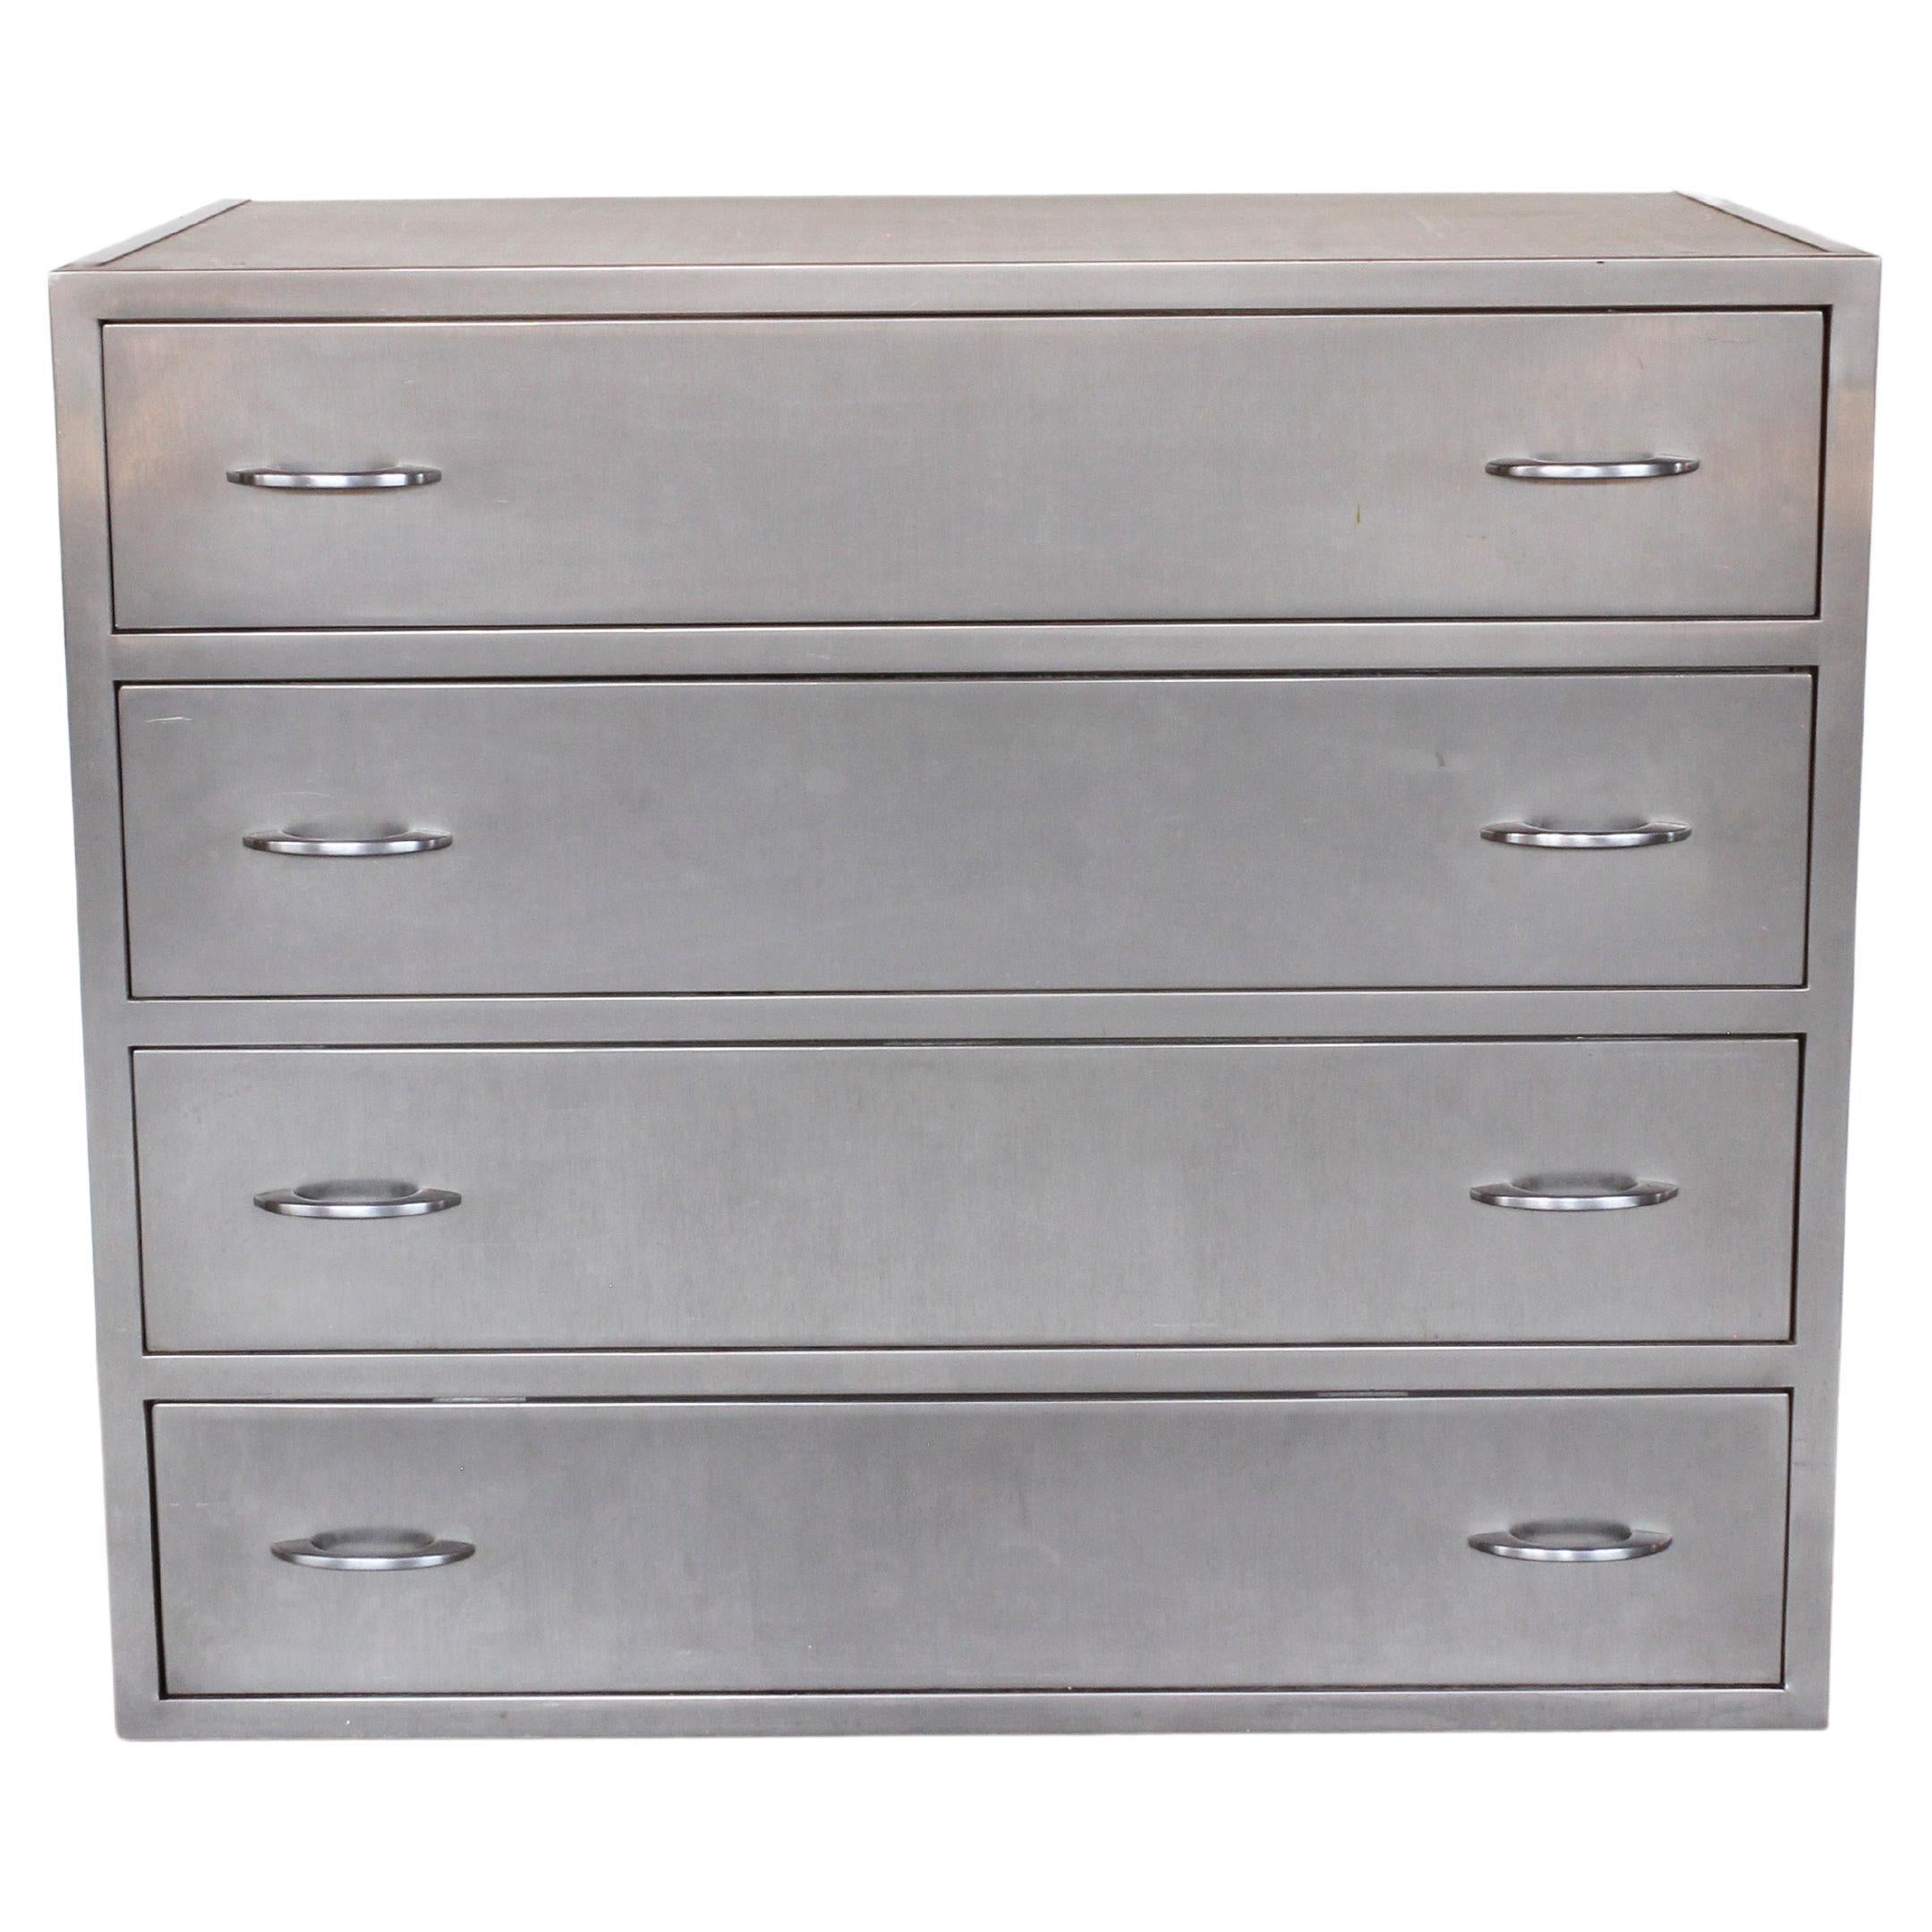 American Industrial Stainless Steel Chest With 4 Drawers, C. 1940s